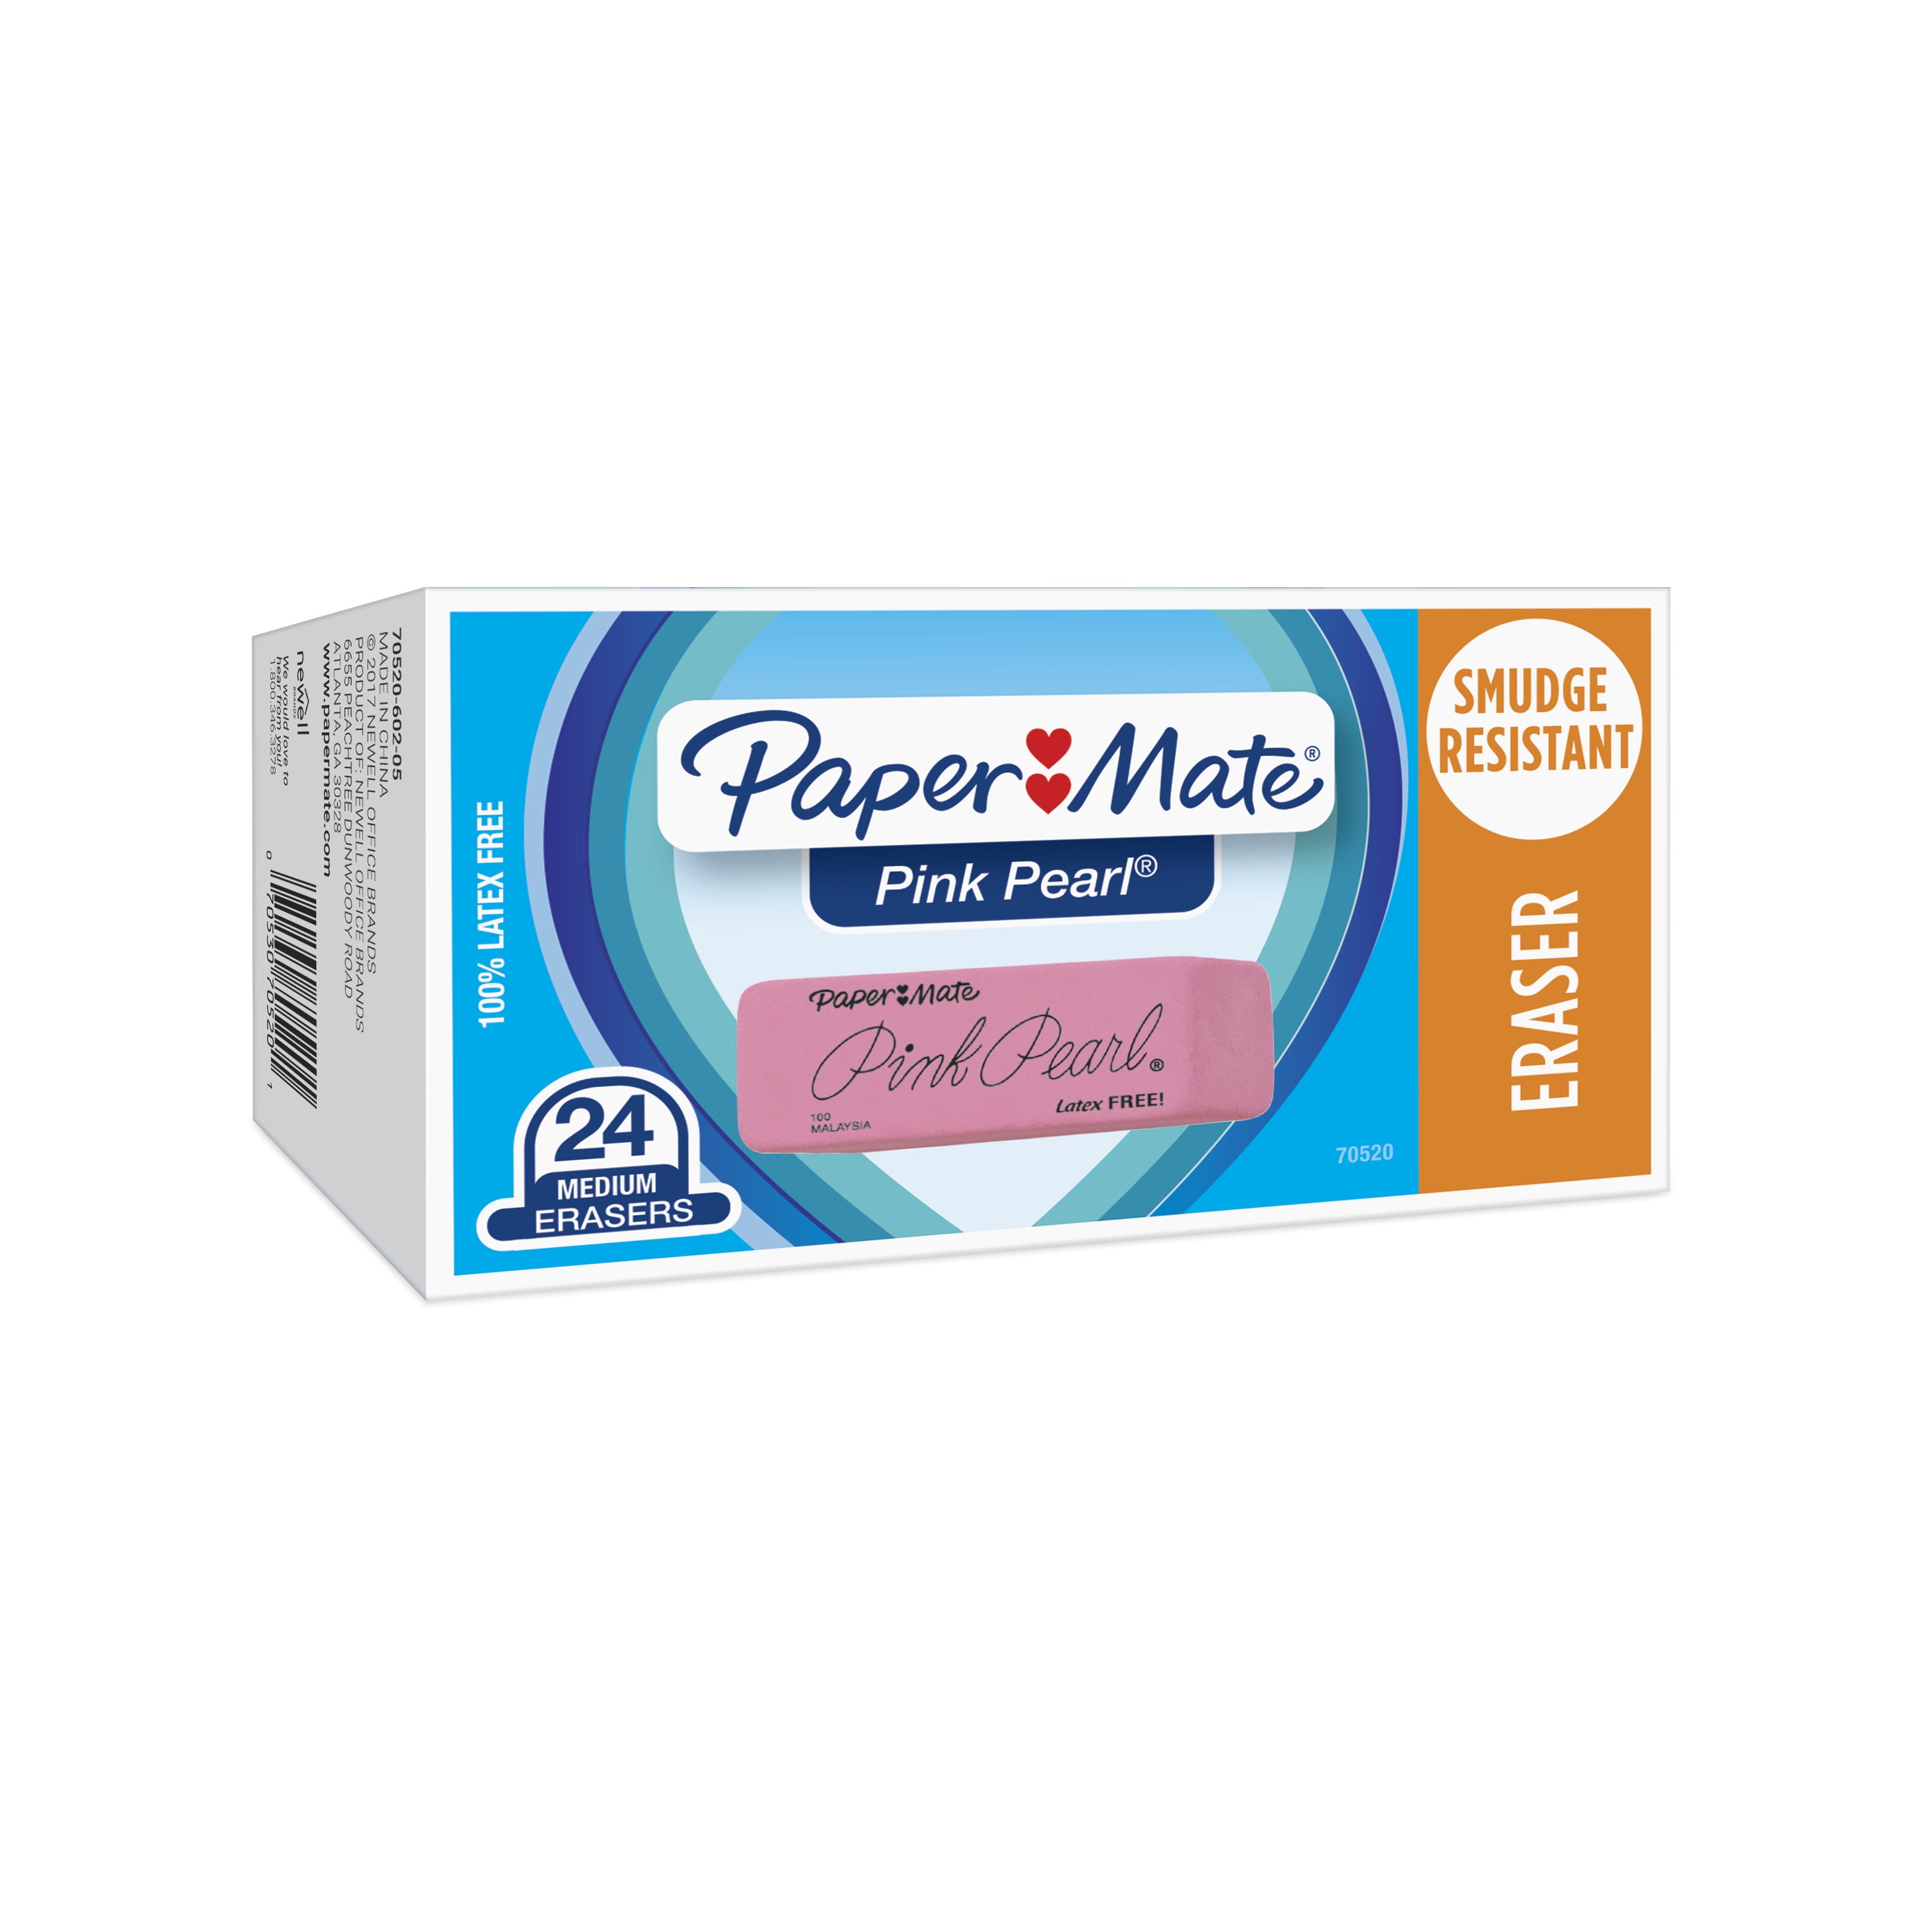 Paper Mate Large Pink Pearl Erasers